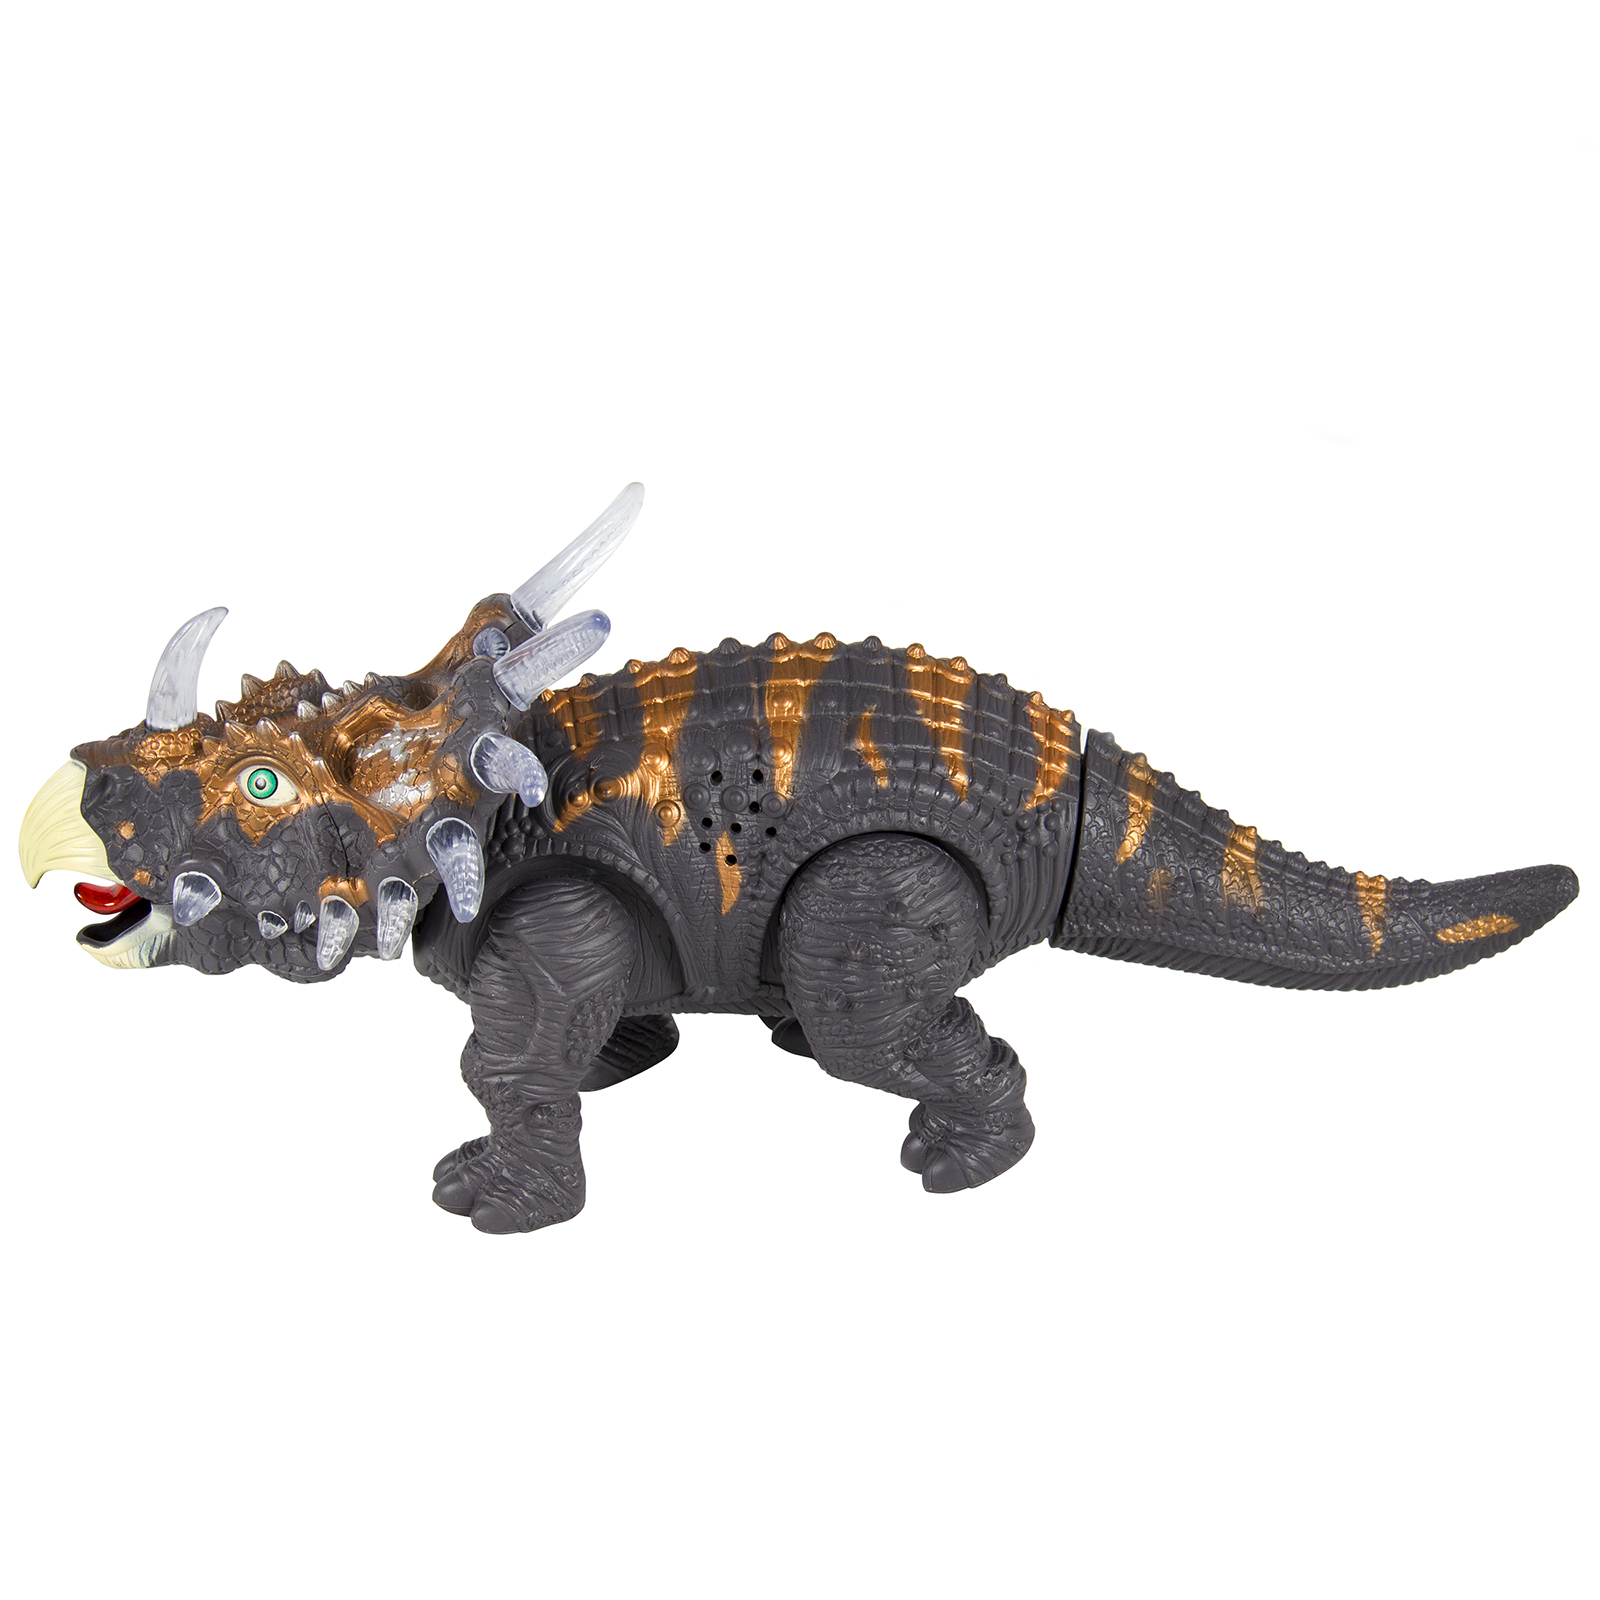 Best Choice Products 14in Kids RC Interactive Walking Triceratops Dinosaur Animal Toy Figure w/ Lights, Sound - image 4 of 7